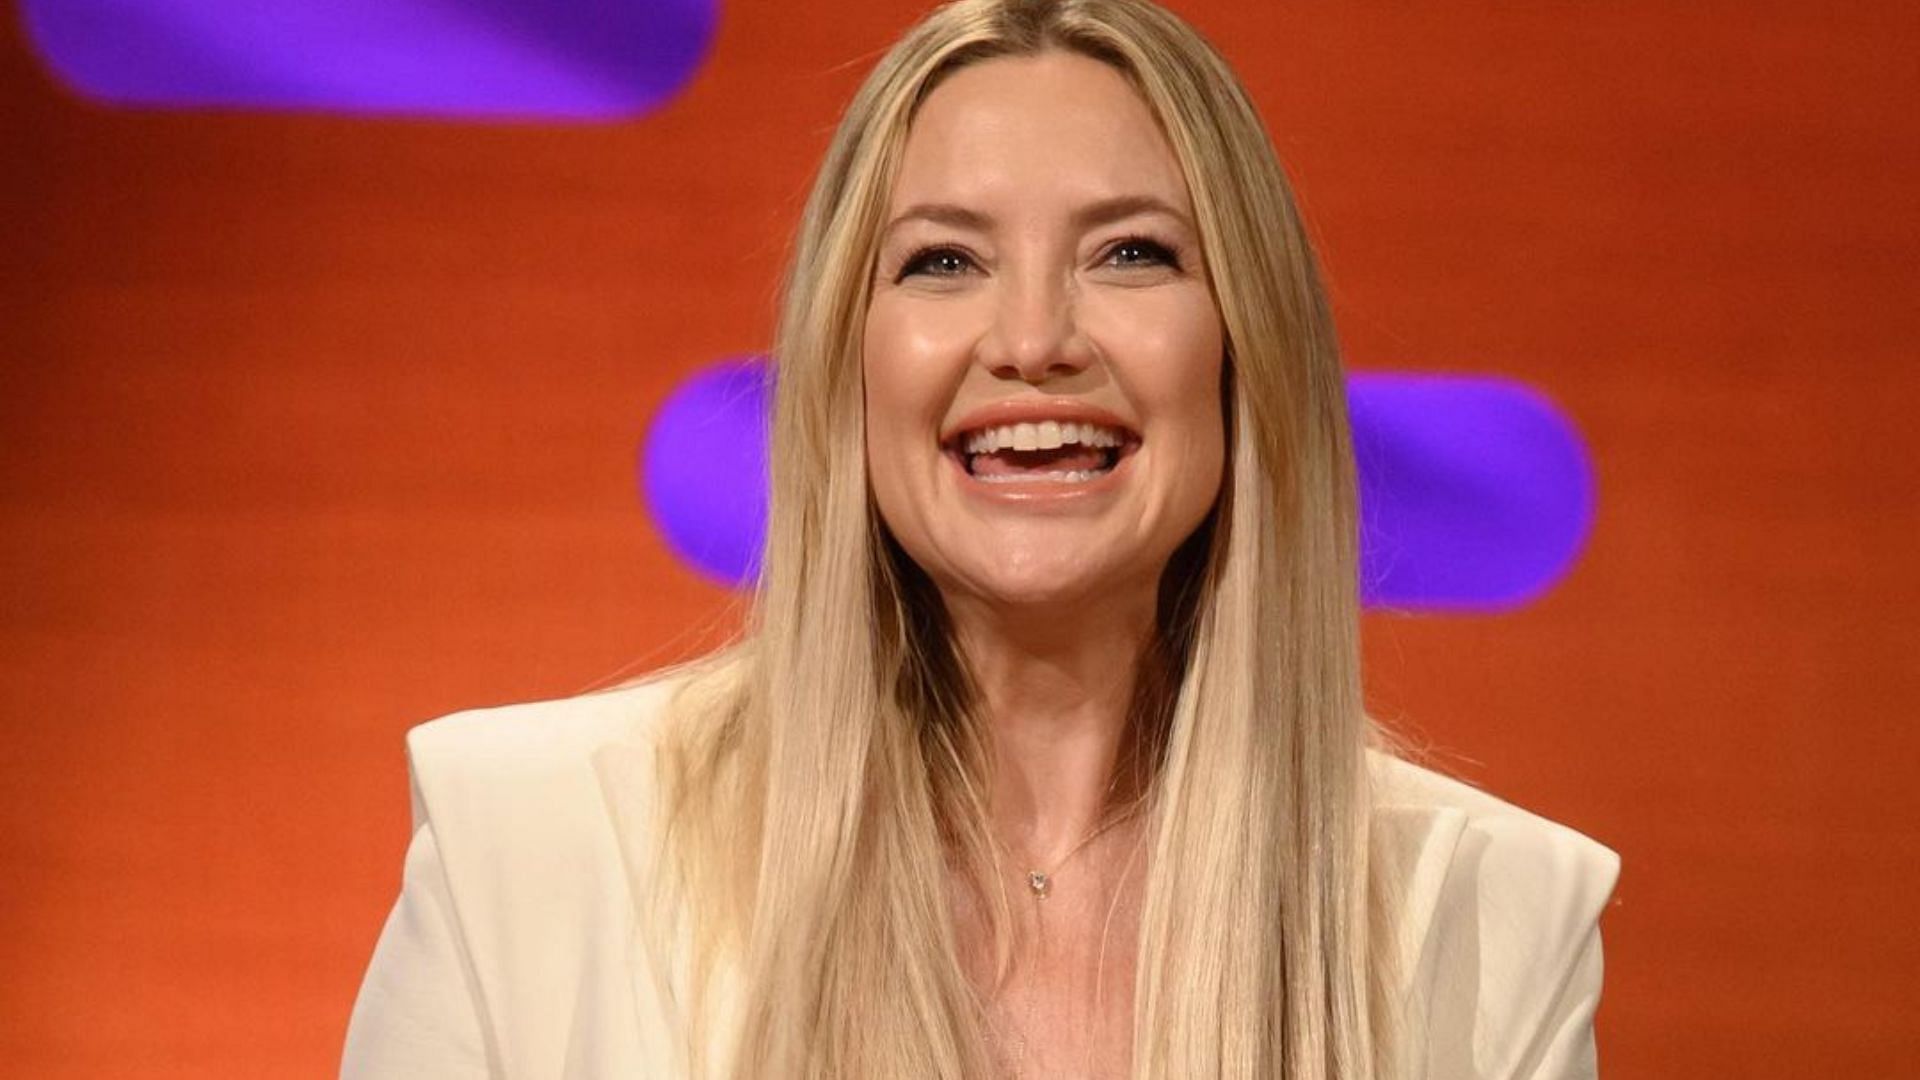 Kate Hudson to appear on Monday